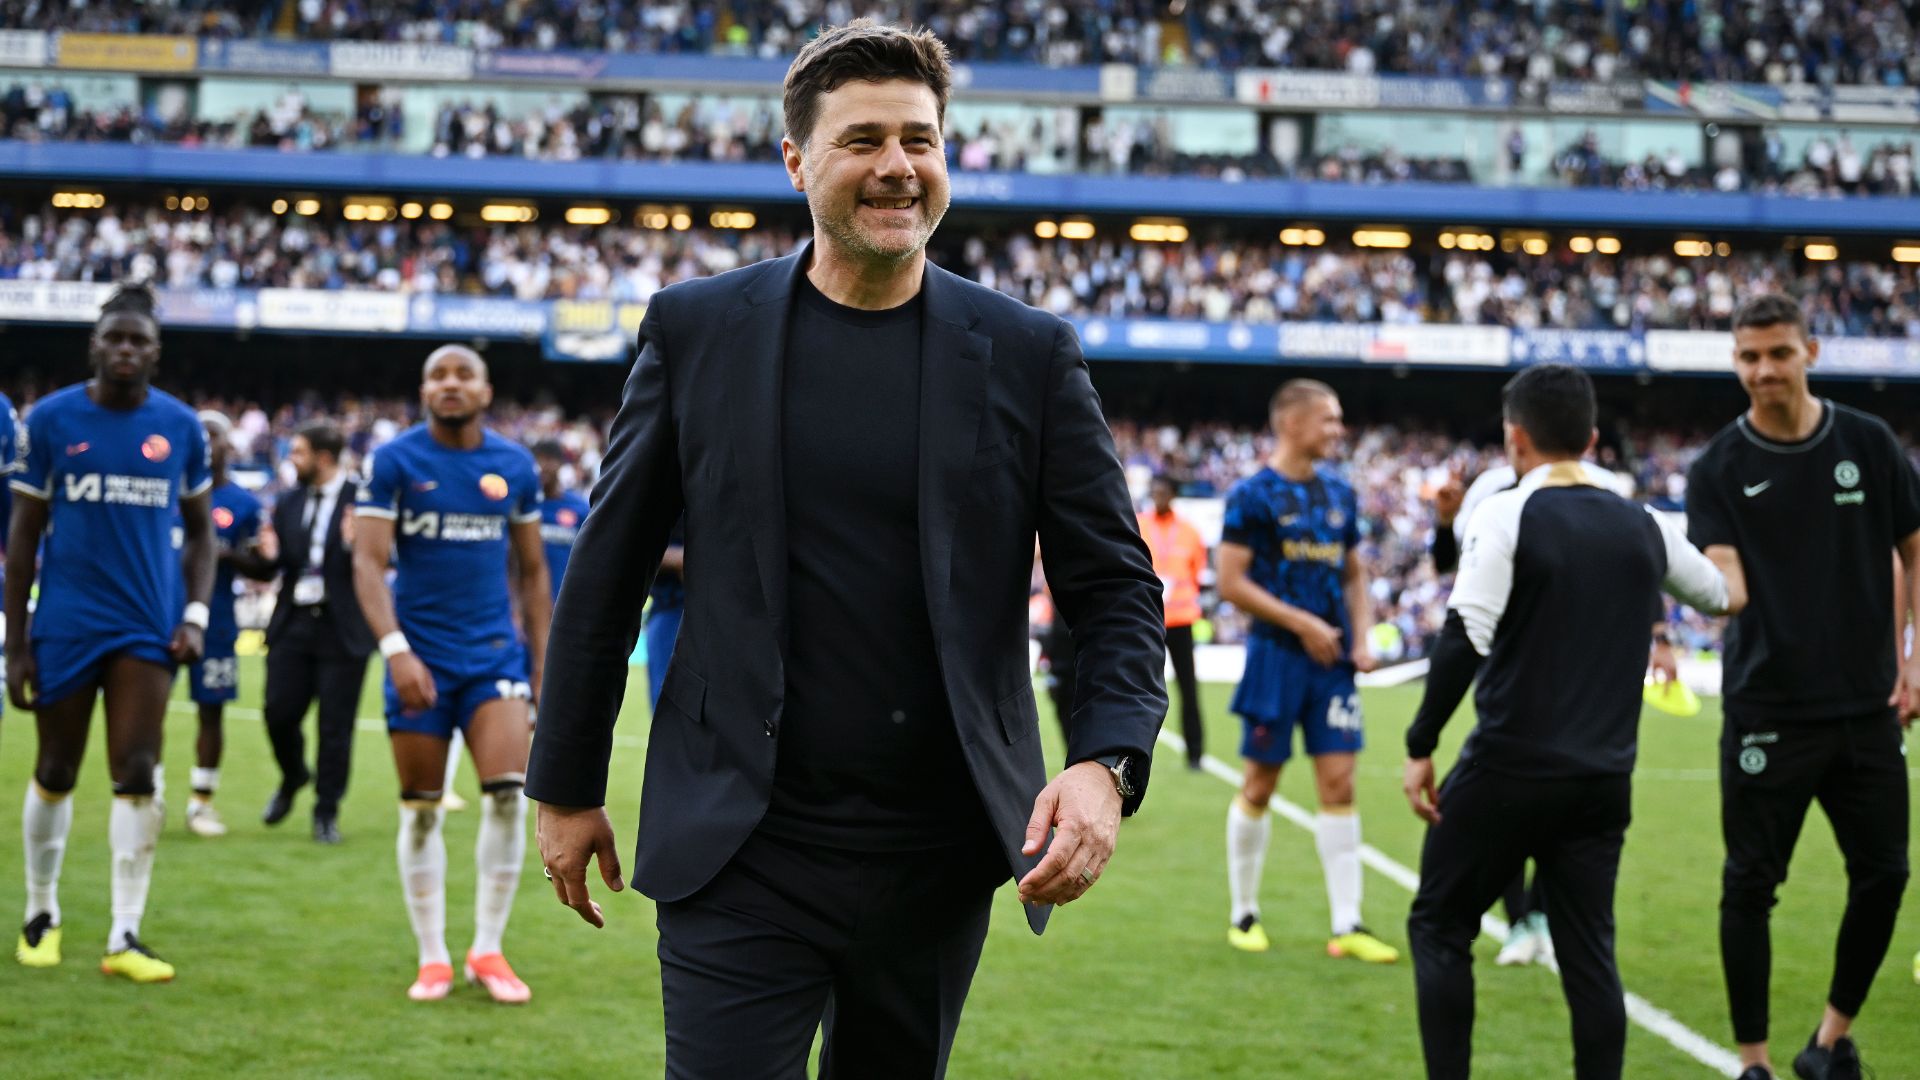 Poch salutes Chelsea players